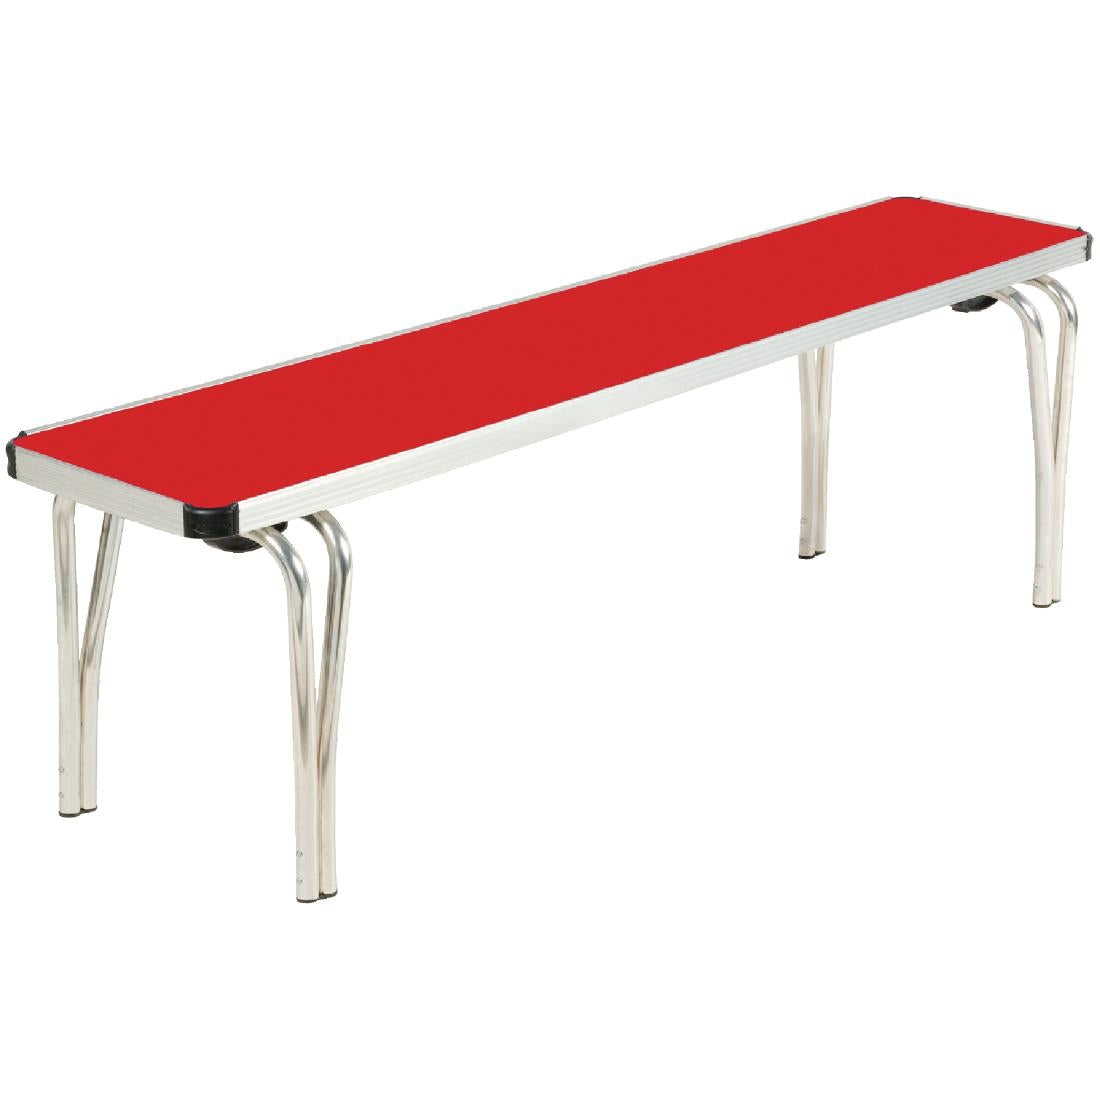 DM951 Gopak Contour Stacking Bench Red 4ft JD Catering Equipment Solutions Ltd